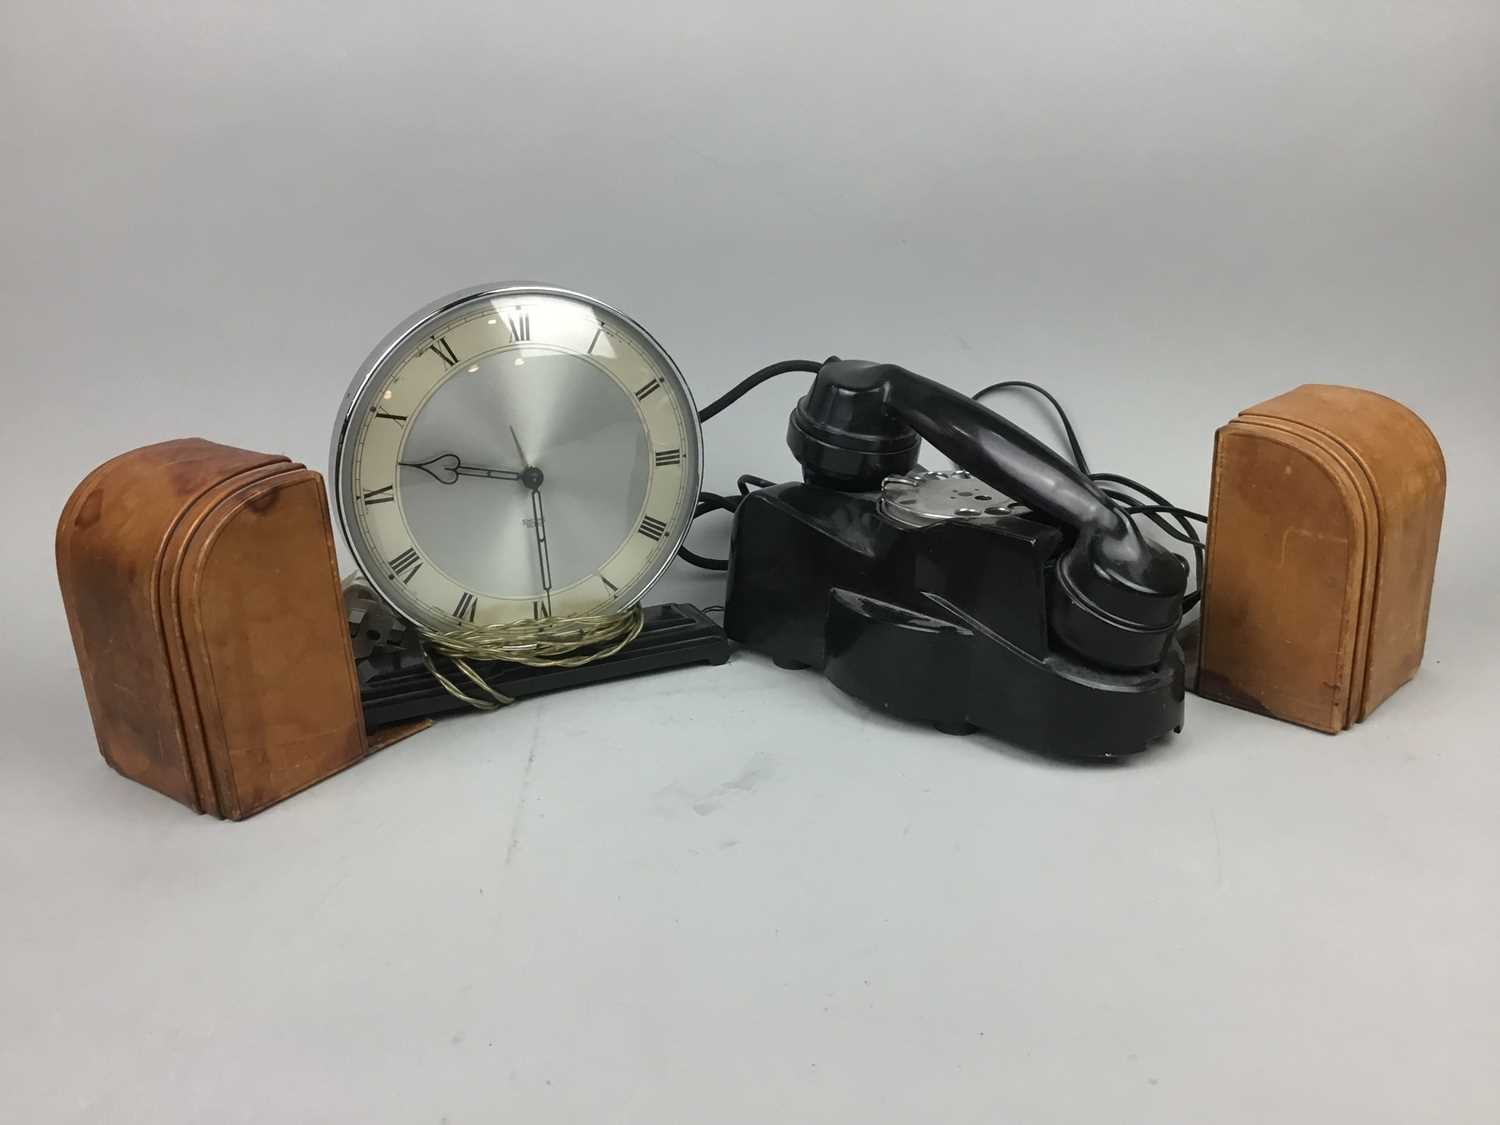 Lot 22 - AN EARLY 20TH CENTURY BAKELITE TELEPHONE, LEATHER BOOKENDS AND A MANTEL CLOCK